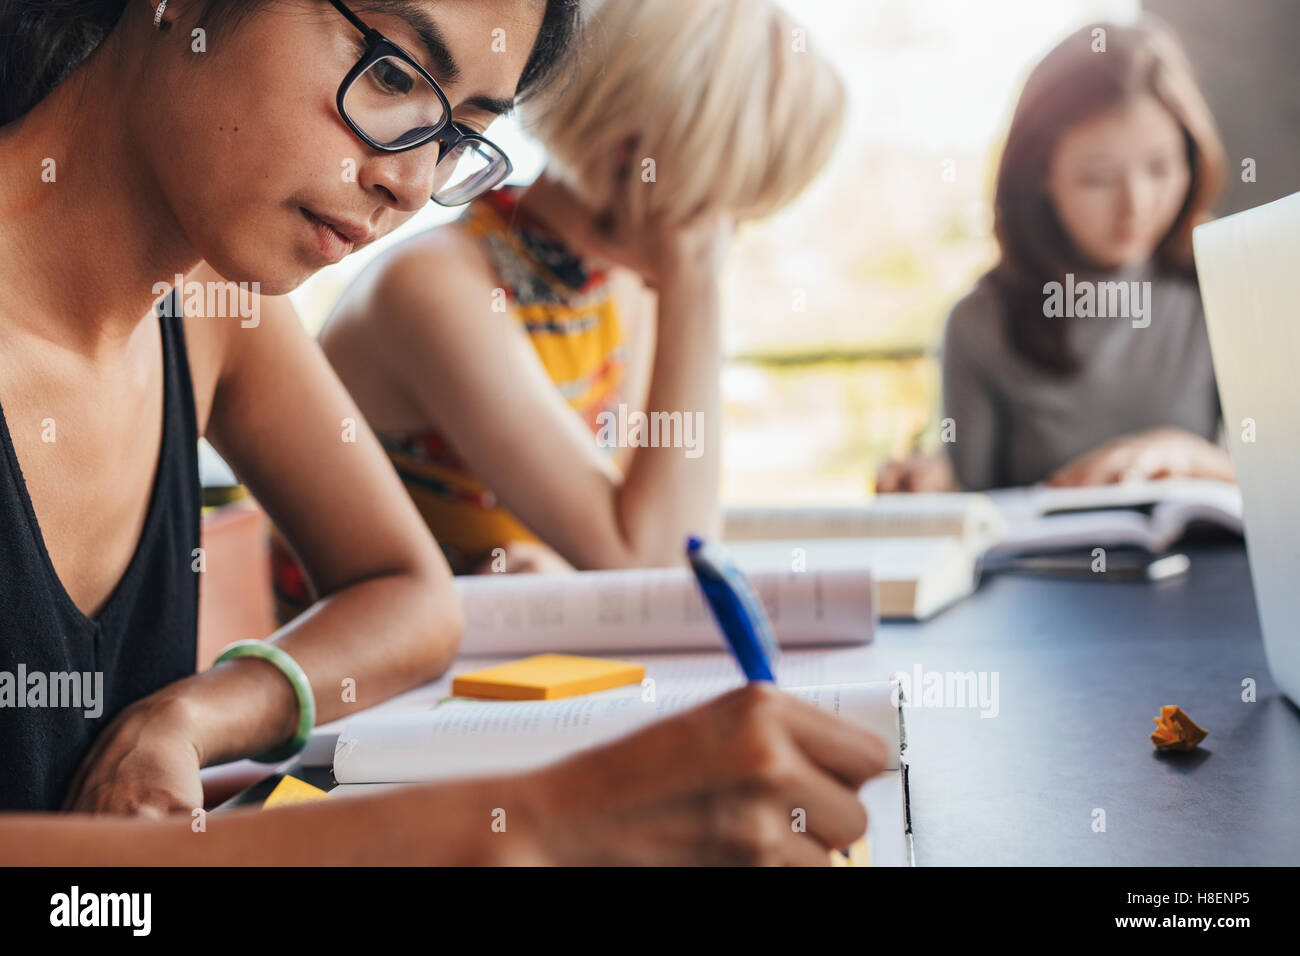 Young asian woman taking notes for her study. Students sitting at table with books and studying. Stock Photo